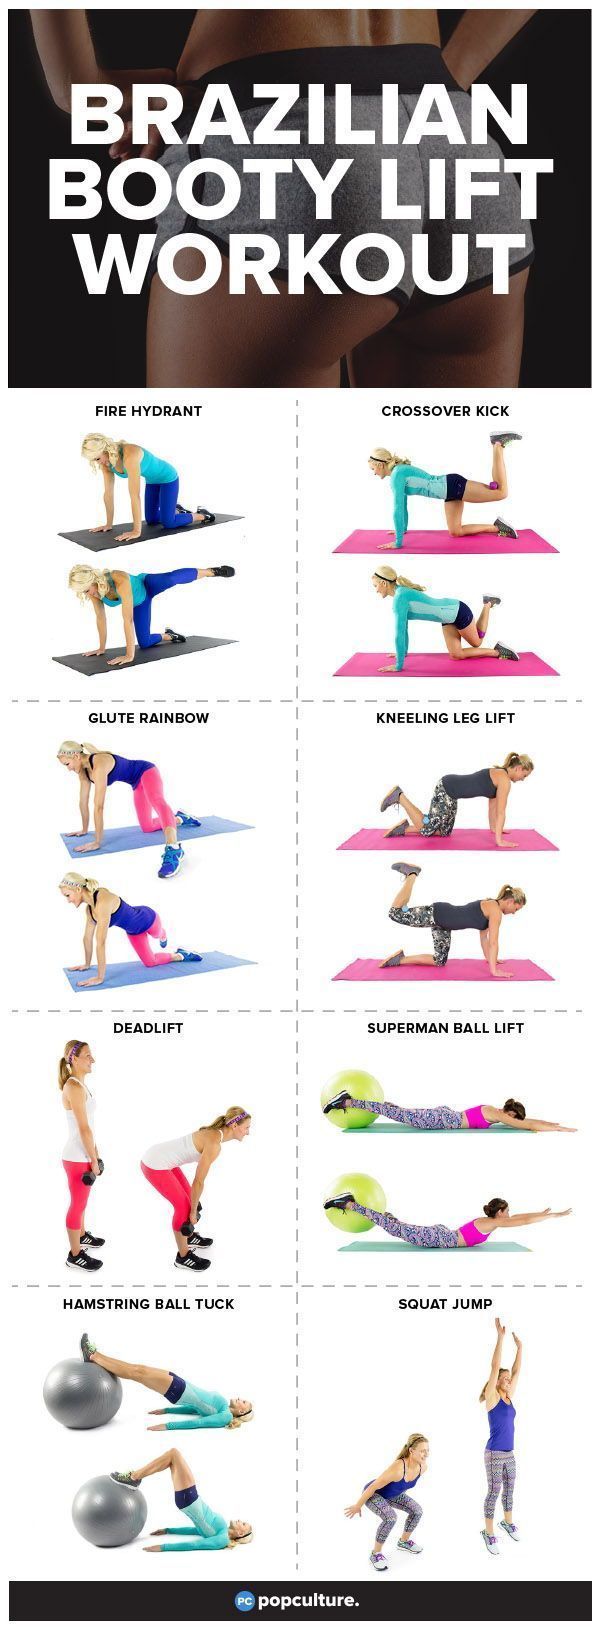 21 fitness workouts life
 ideas